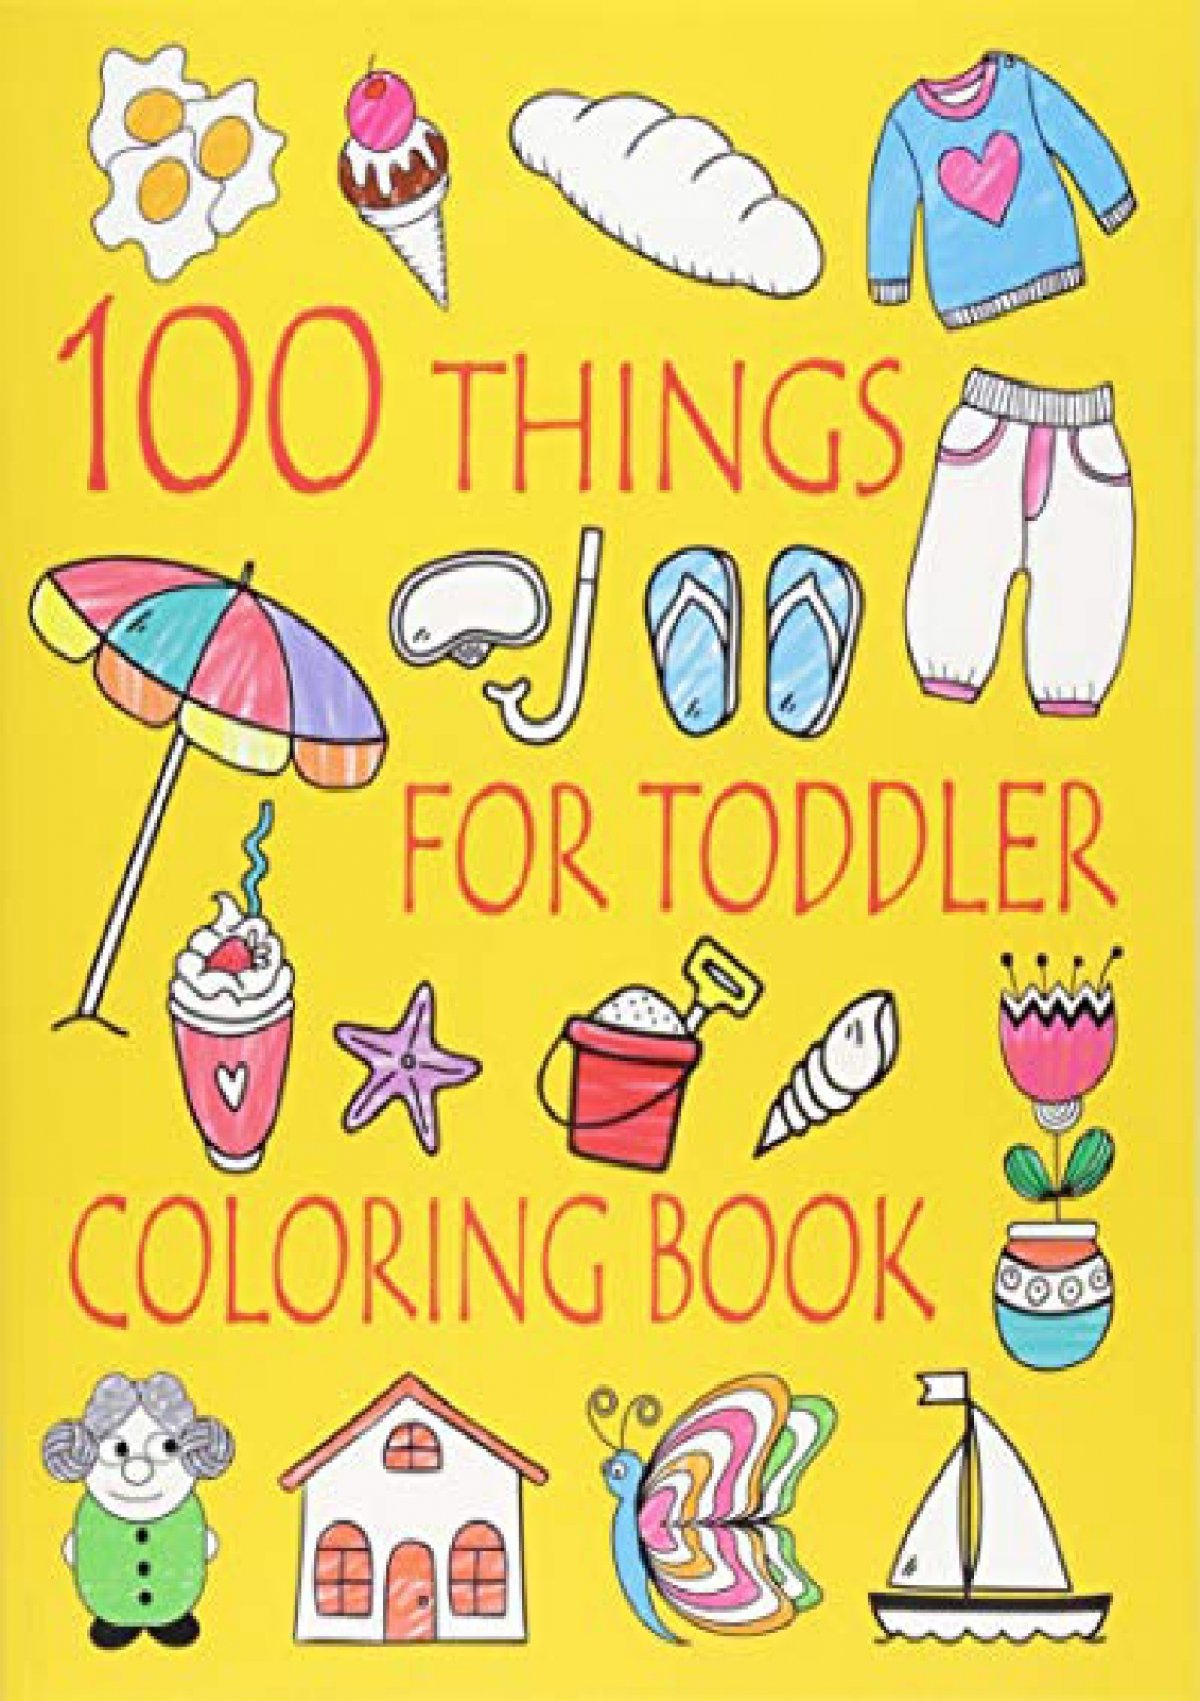 Download Pdf Re View 100 Things For Toddler Coloring Book Easy And Big Coloring Books For Toddlers Kids Ages 2 4 4 8 Boys Girls Fun Early Learning Volume 2